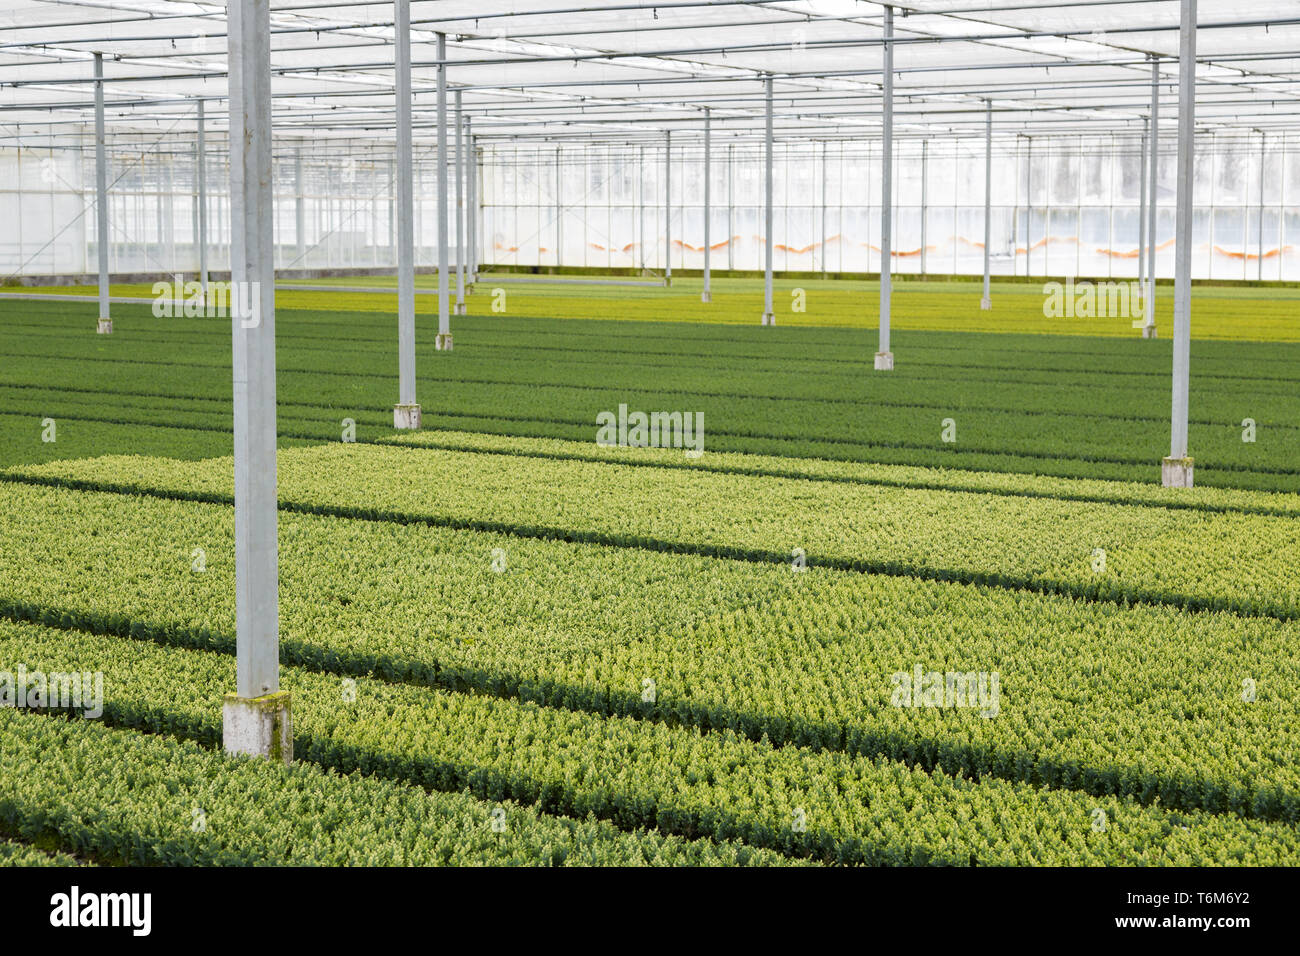 Cultivation of cupressus in a Dutch greenhouse Stock Photo